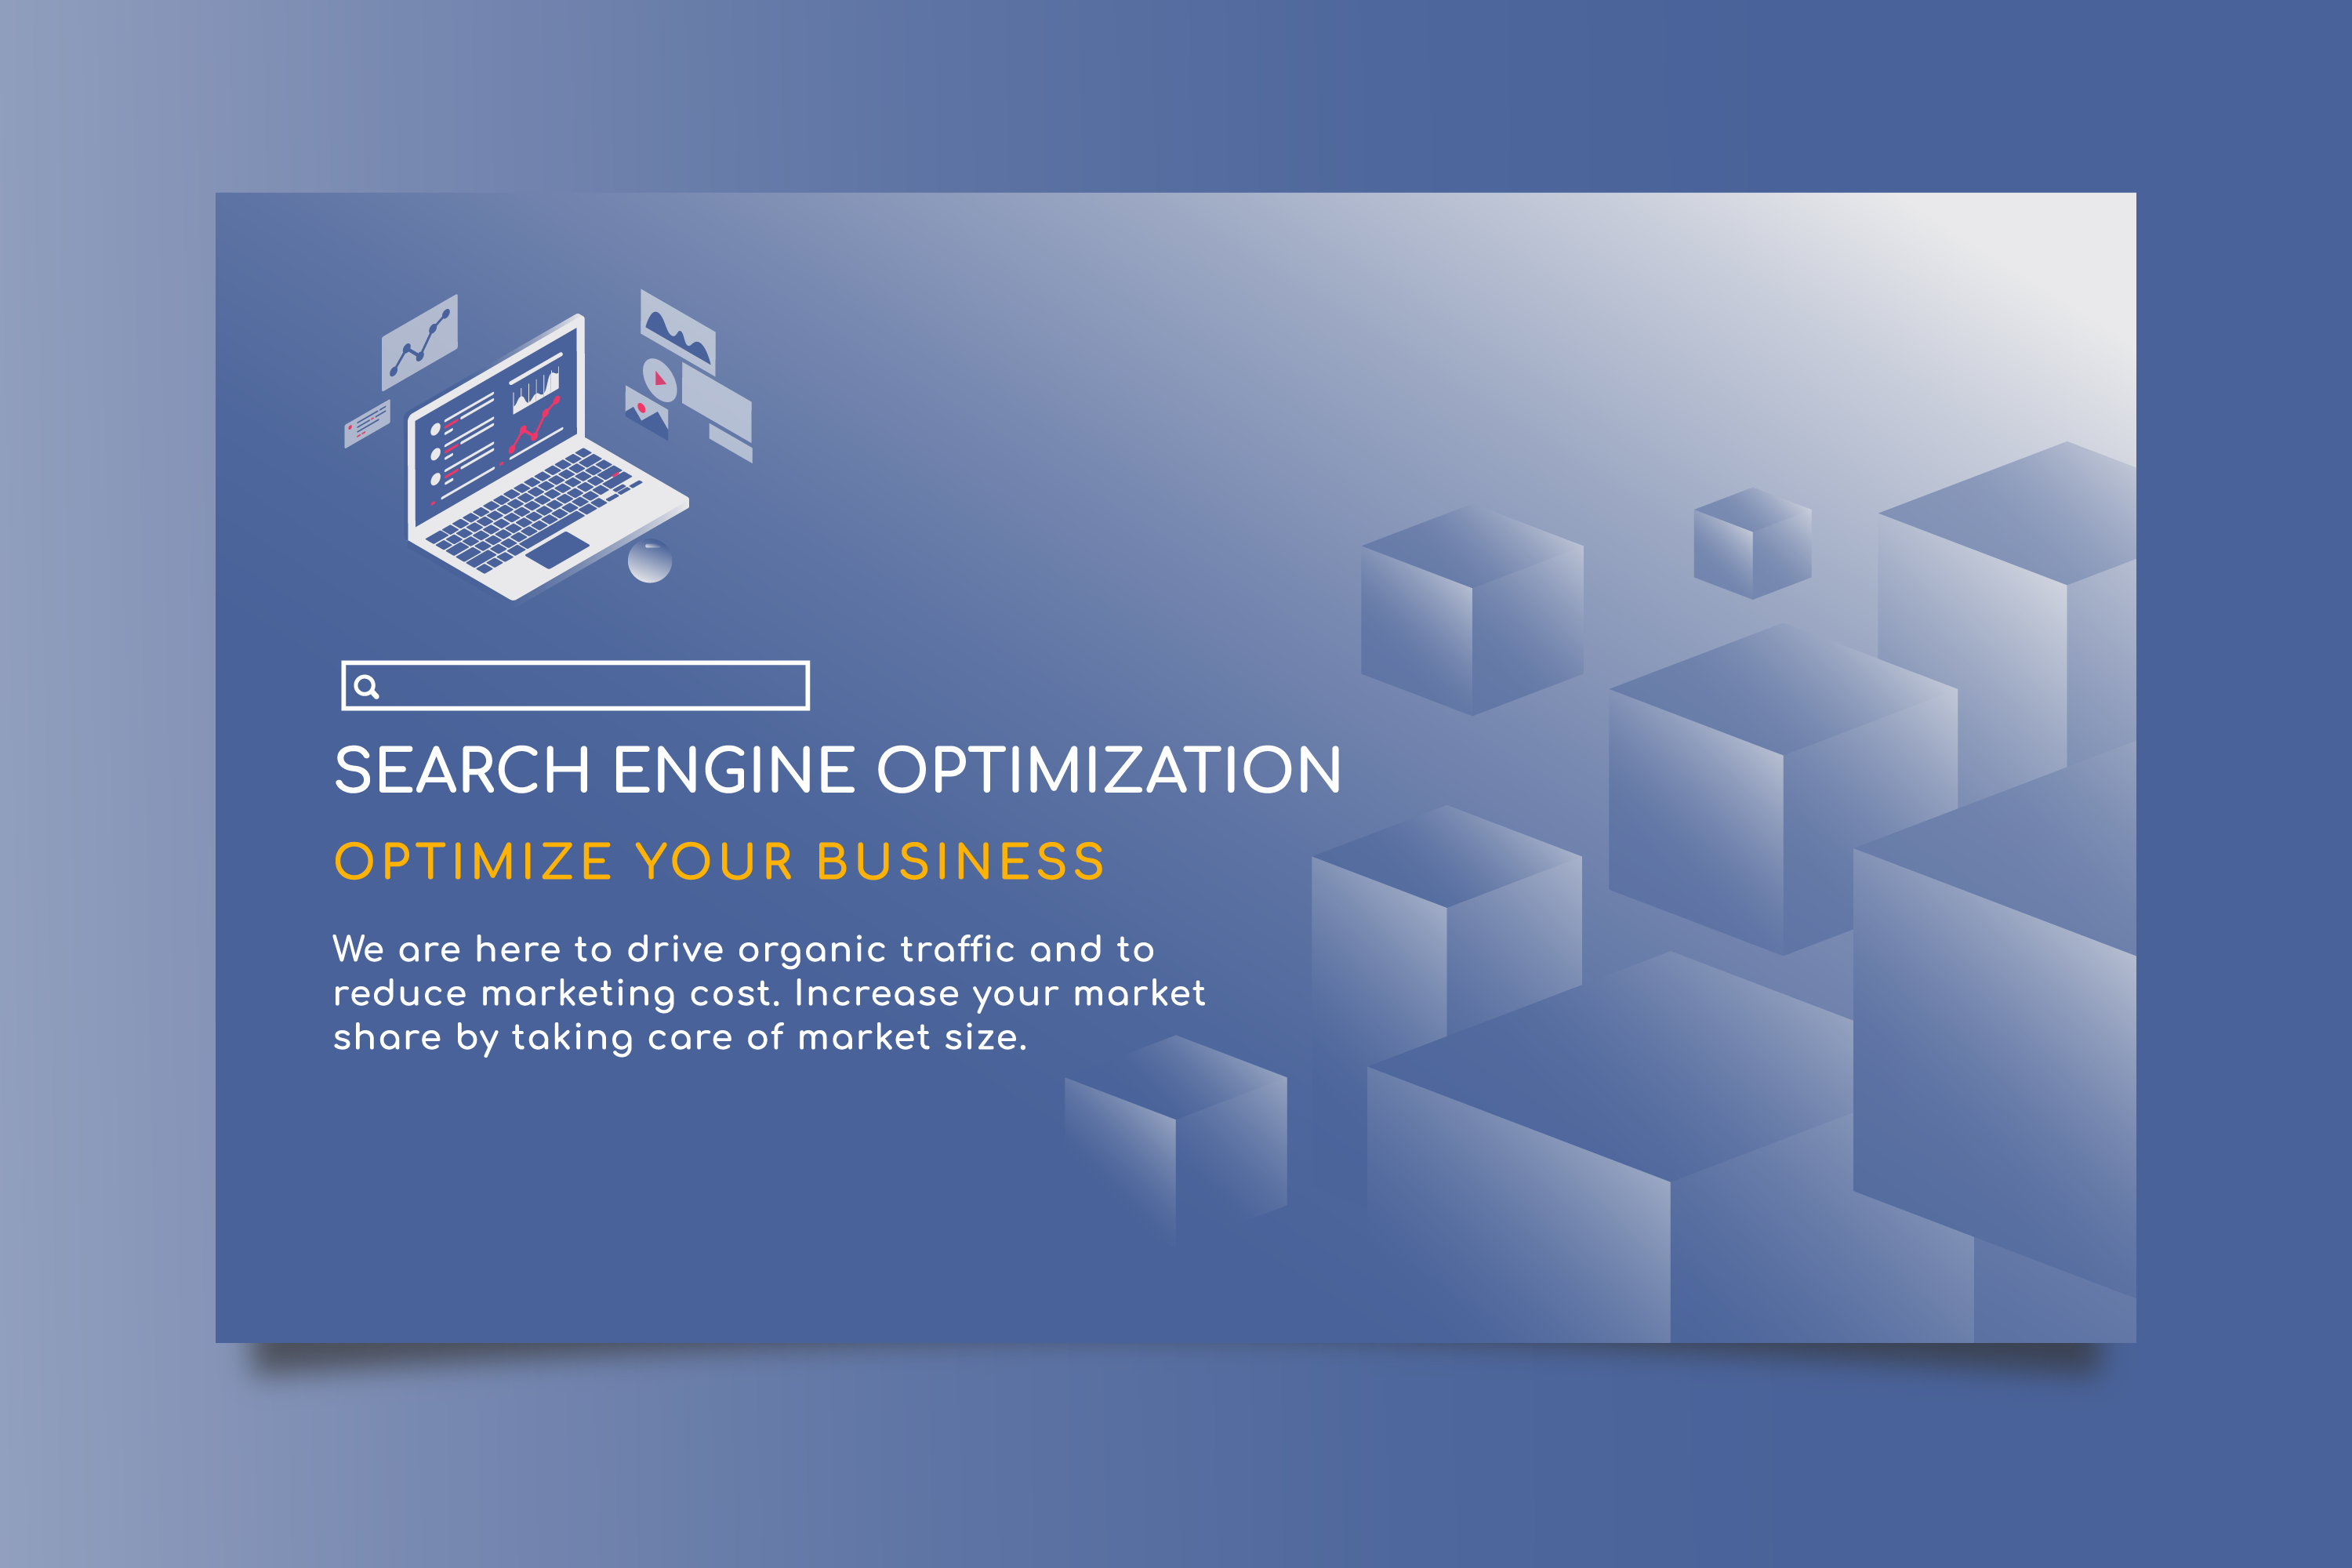 Search engine optimization tools